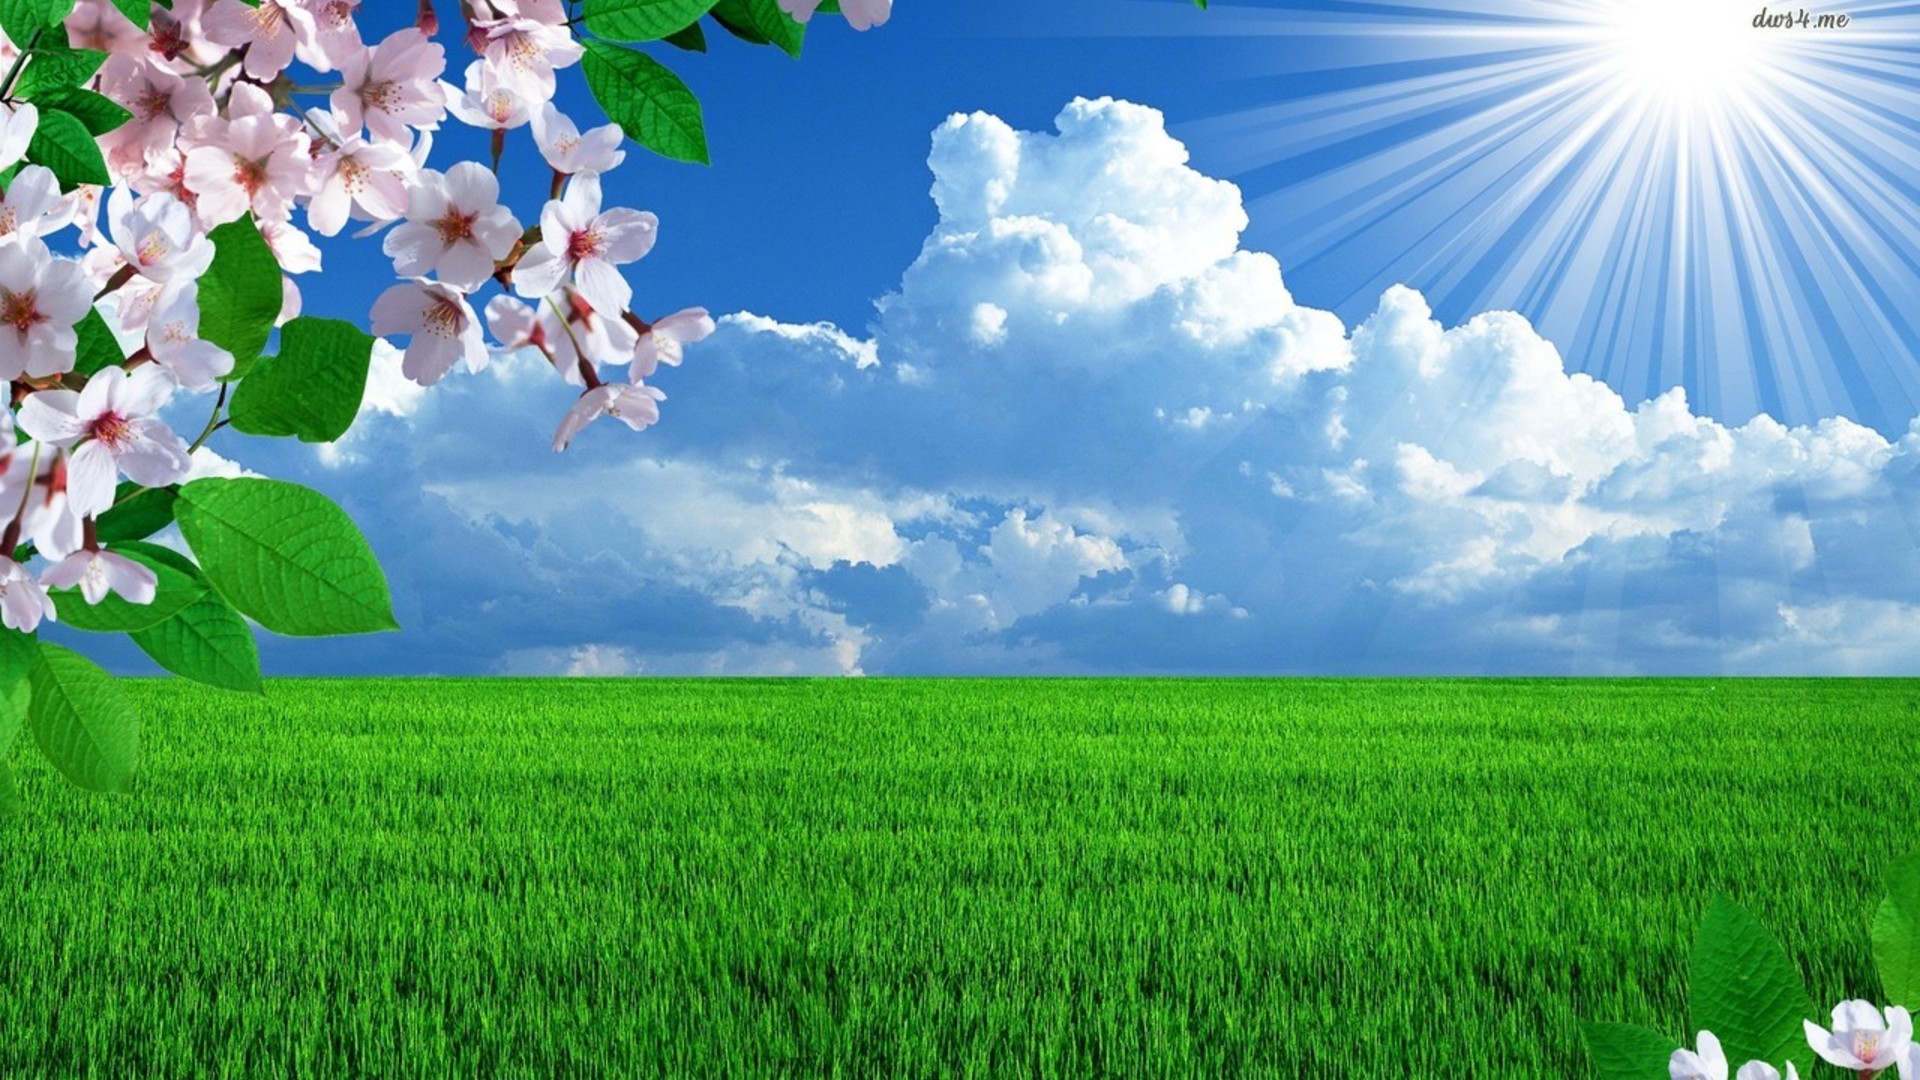 beautiful-green-grass-in-a-sunny-spring-day_1920x1080 1.jpg.